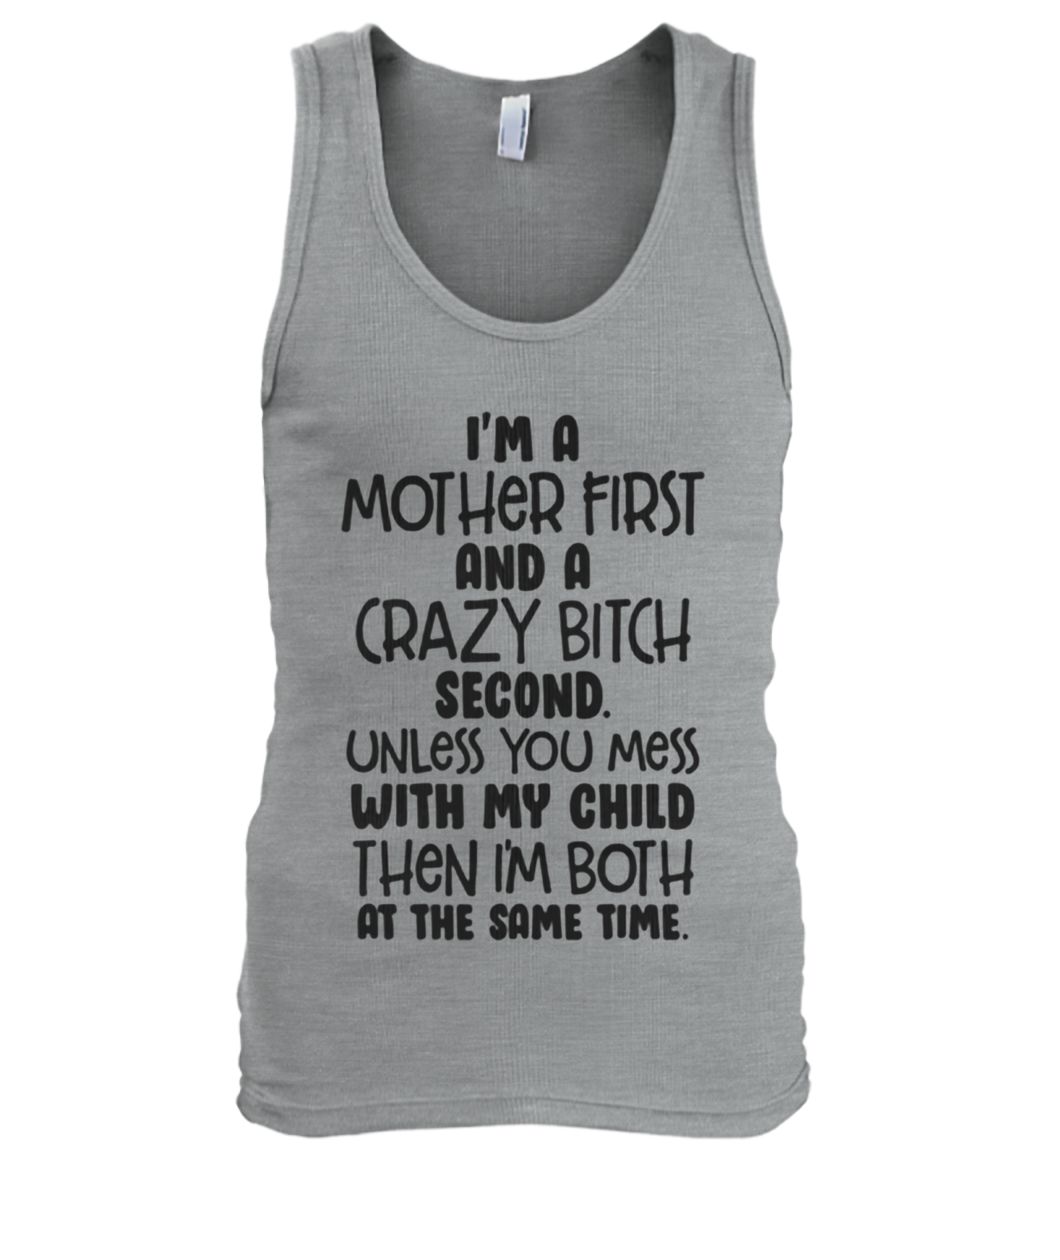 I'm a mother first and a crazy bitch second unless you mess with my child men's tank top